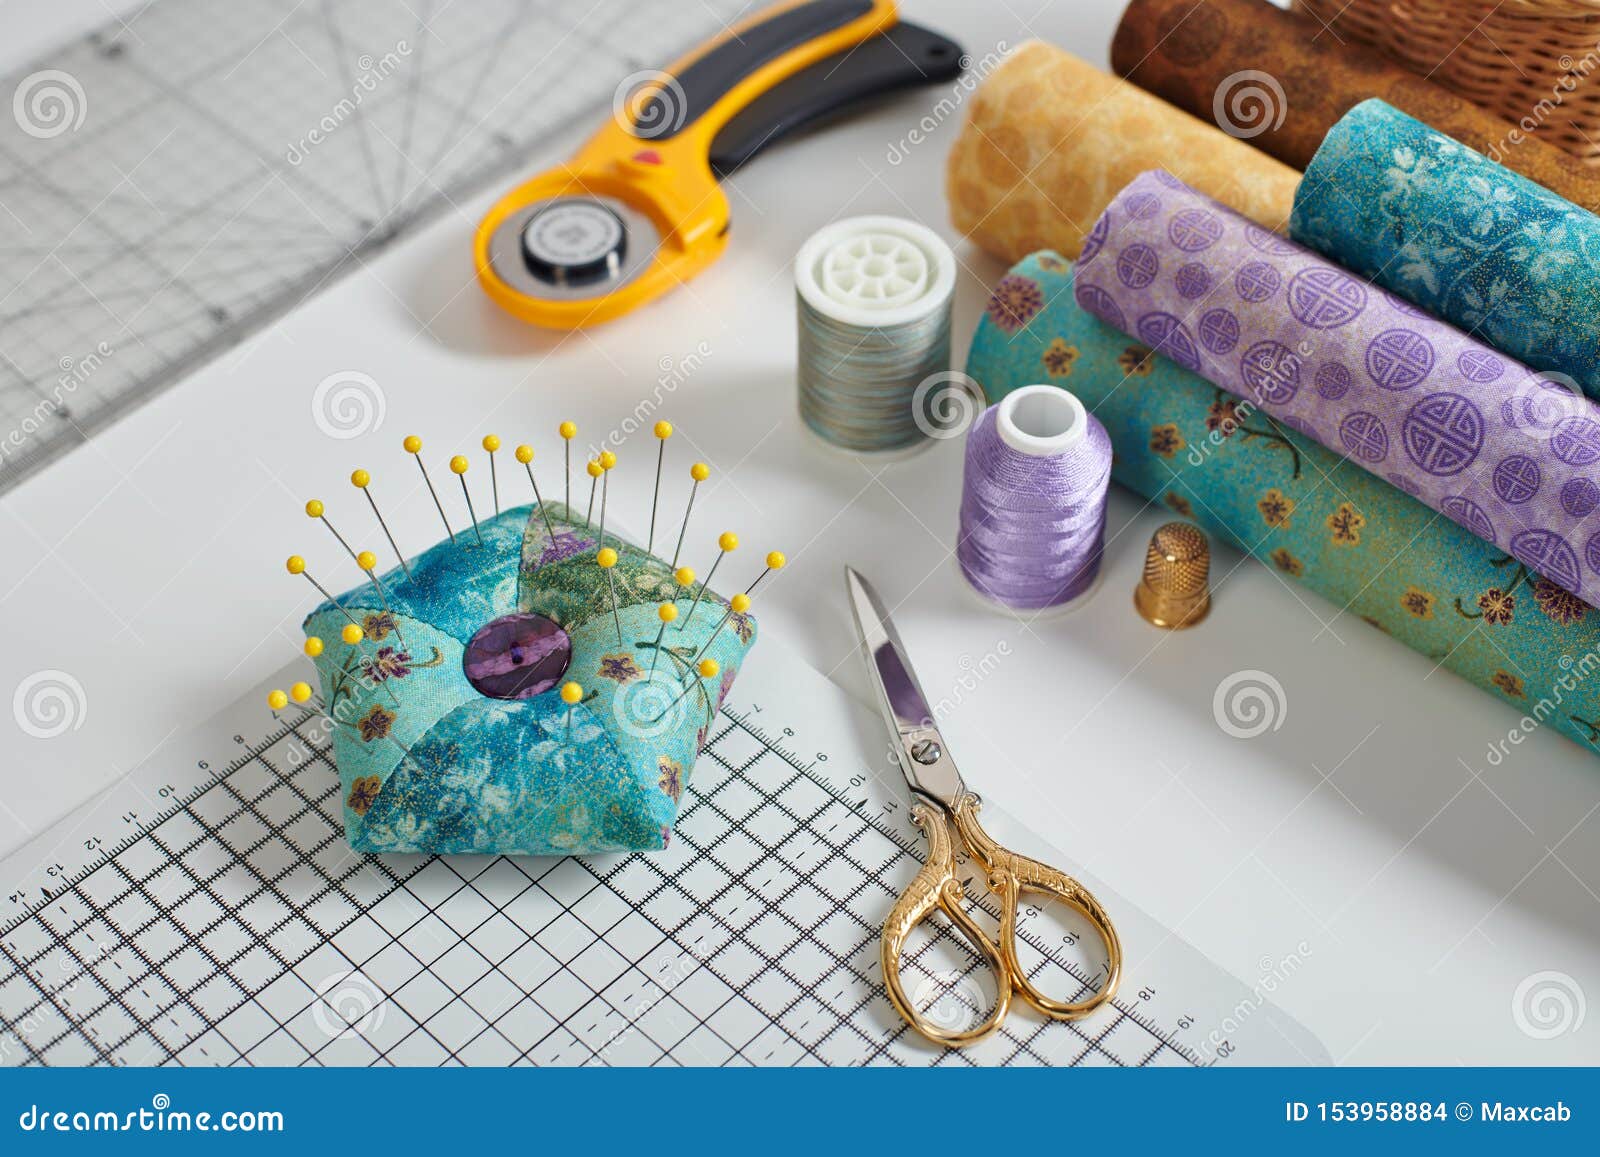 Pincushion, Craft Mat, Scissors, Rotary Cutter, Fabric Rolls, Sewing and Quilting  Accessories Stock Photo - Image of hobbies, material: 153958884